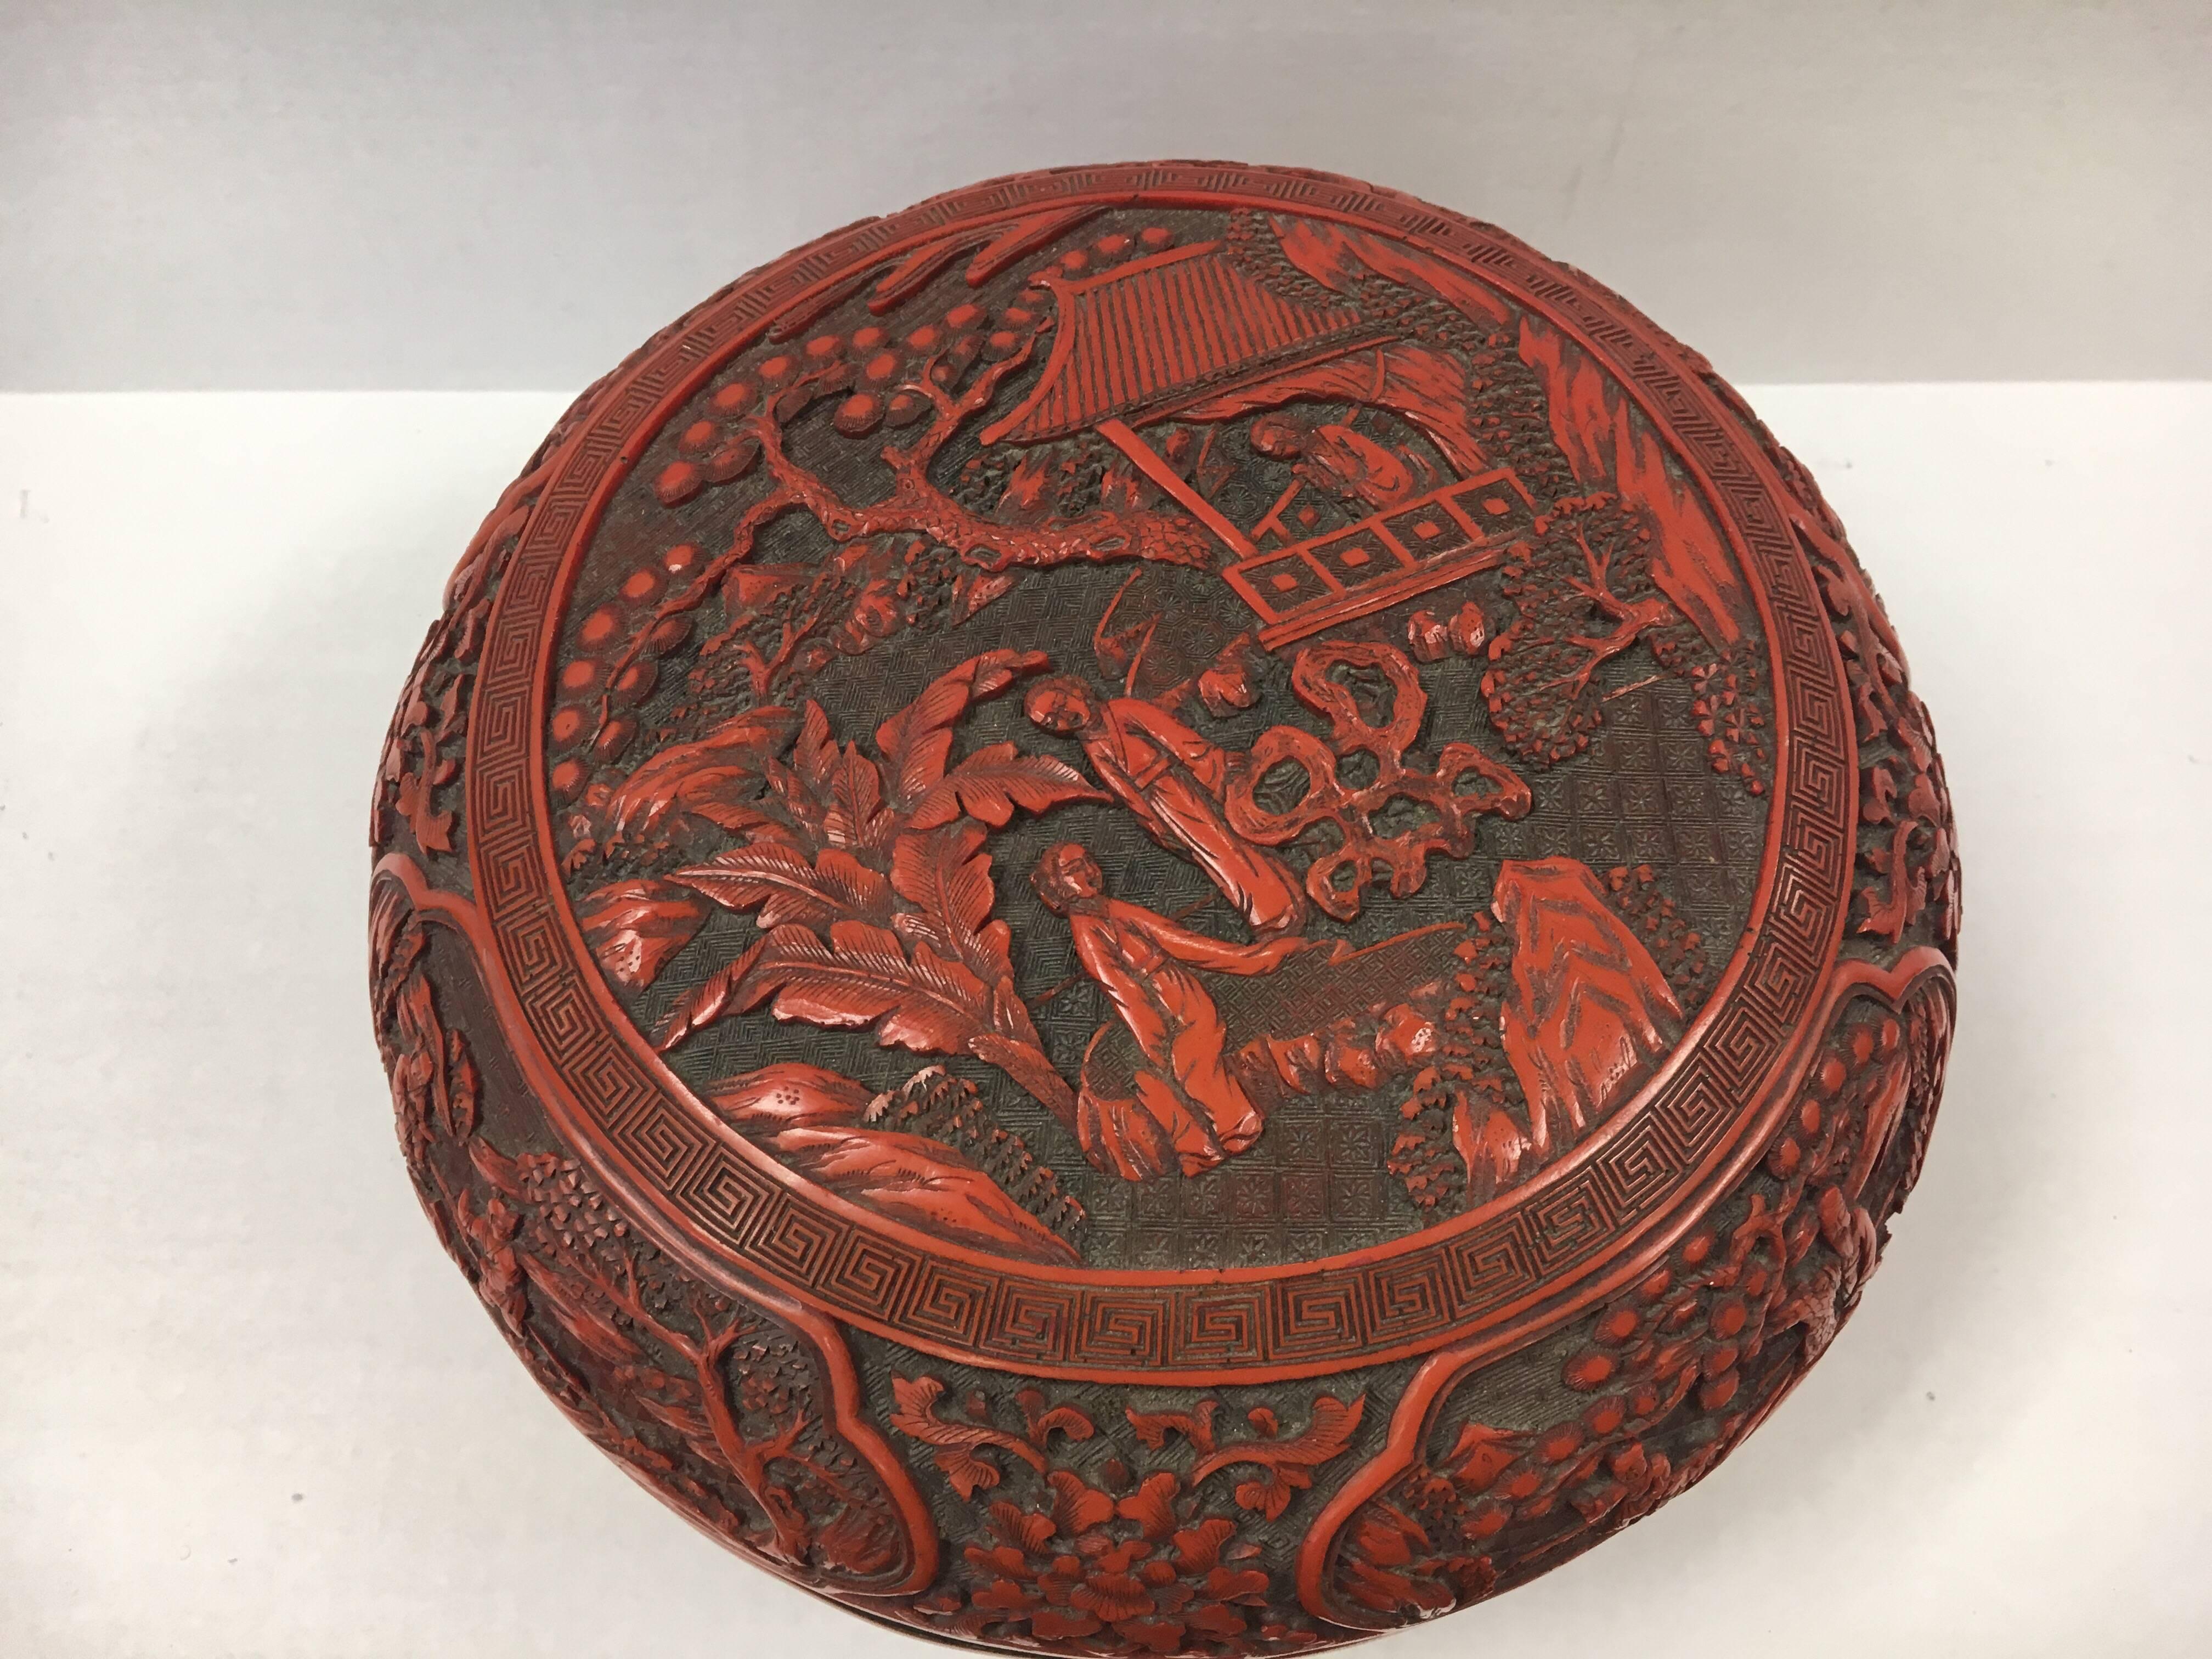 Rare cinnabar round lidded box with intricate carvings throughout. What makes this item most desirable is its size, which is much larger than the usual small trinket size cinnabar pieces available.